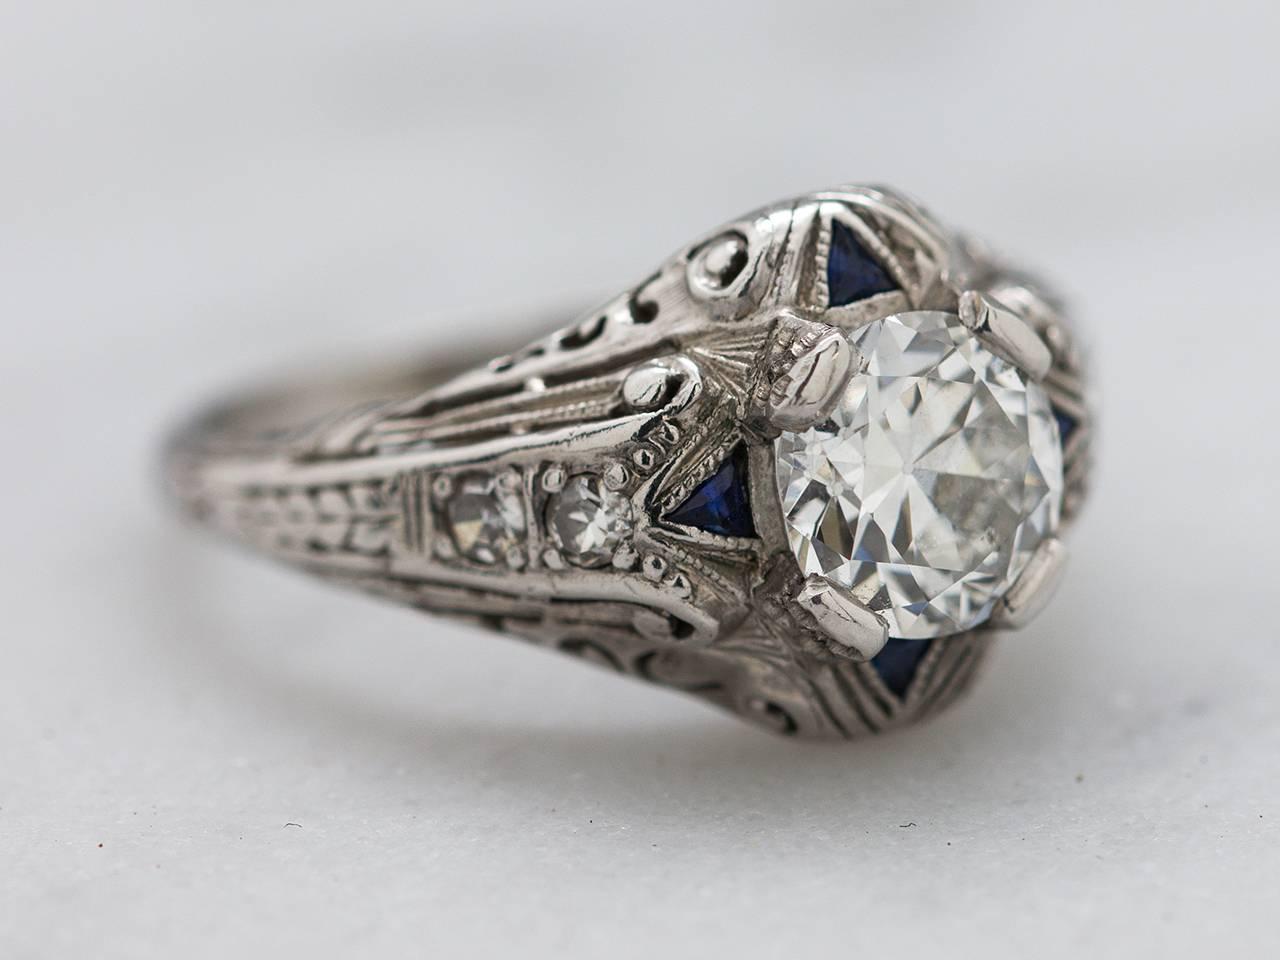 Finely crafted vintage platinum engagement ring with sapphire & diamond accents featuring an EGL certified  colorless 0.89ct Old European cut diamond E-SI2. Romantic pierced, scrolled design and finely executed hand engraved details. Absolutely